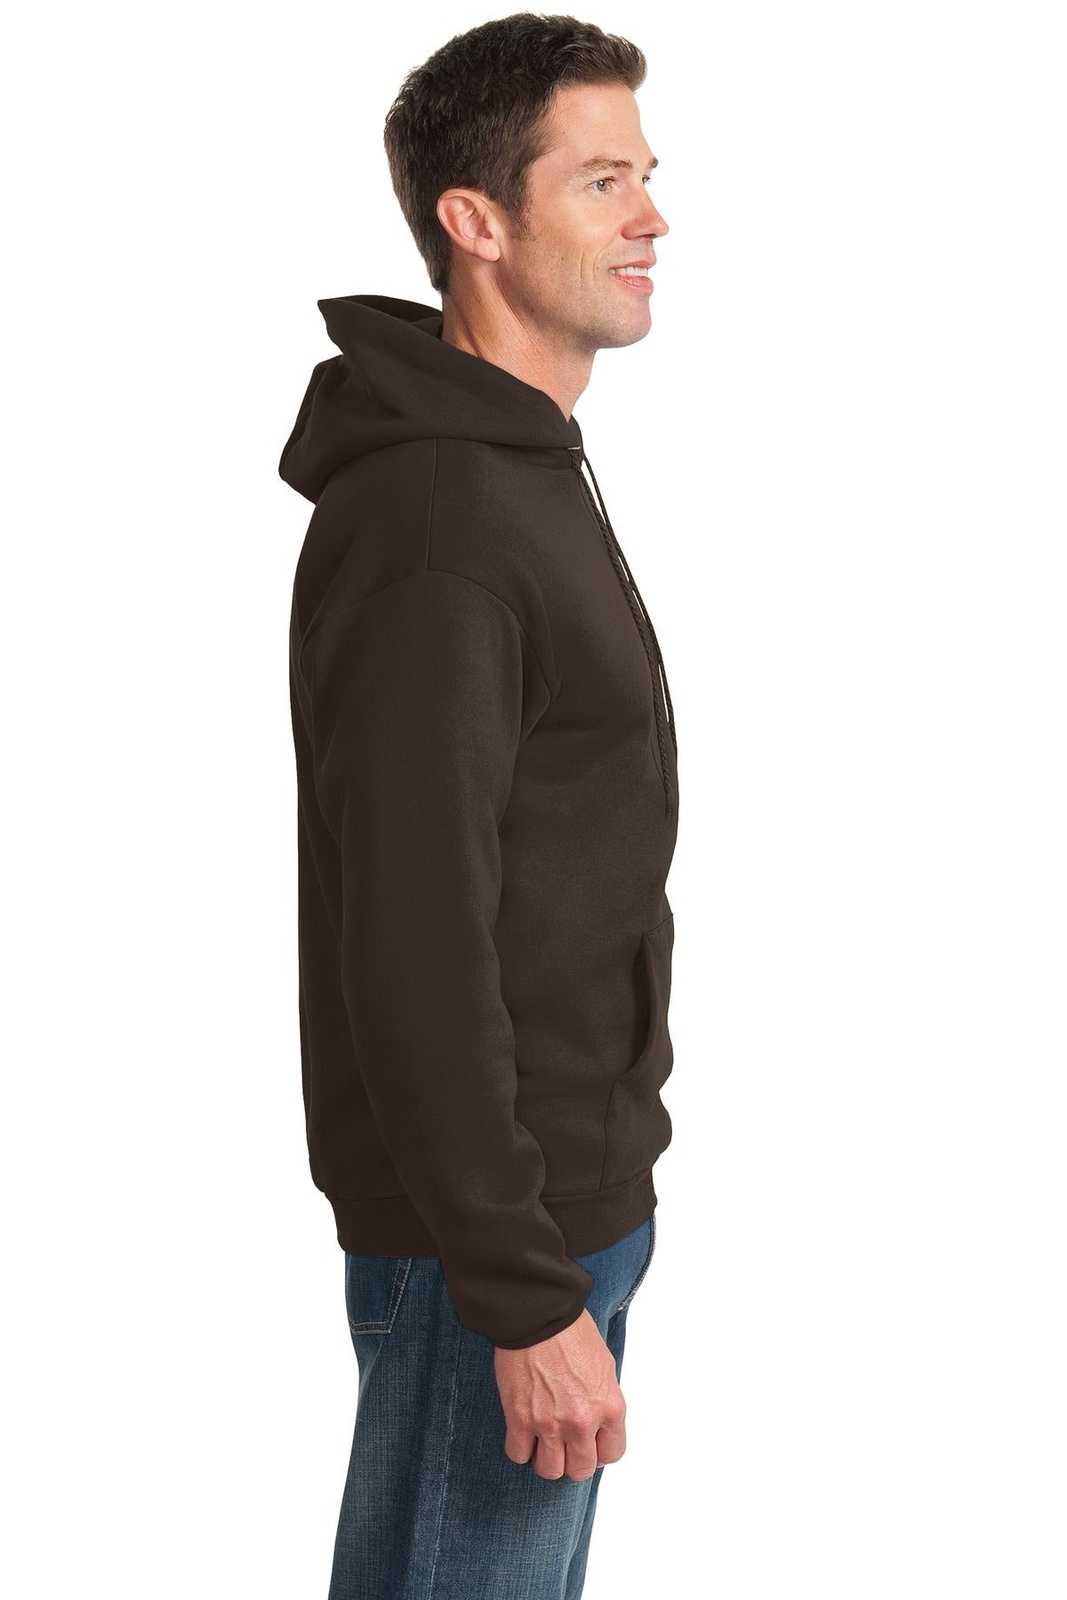 Port &amp; Company PC90H Essential Fleece Pullover Hooded Sweatshirt - Dark Chocolate Brown - HIT a Double - 3